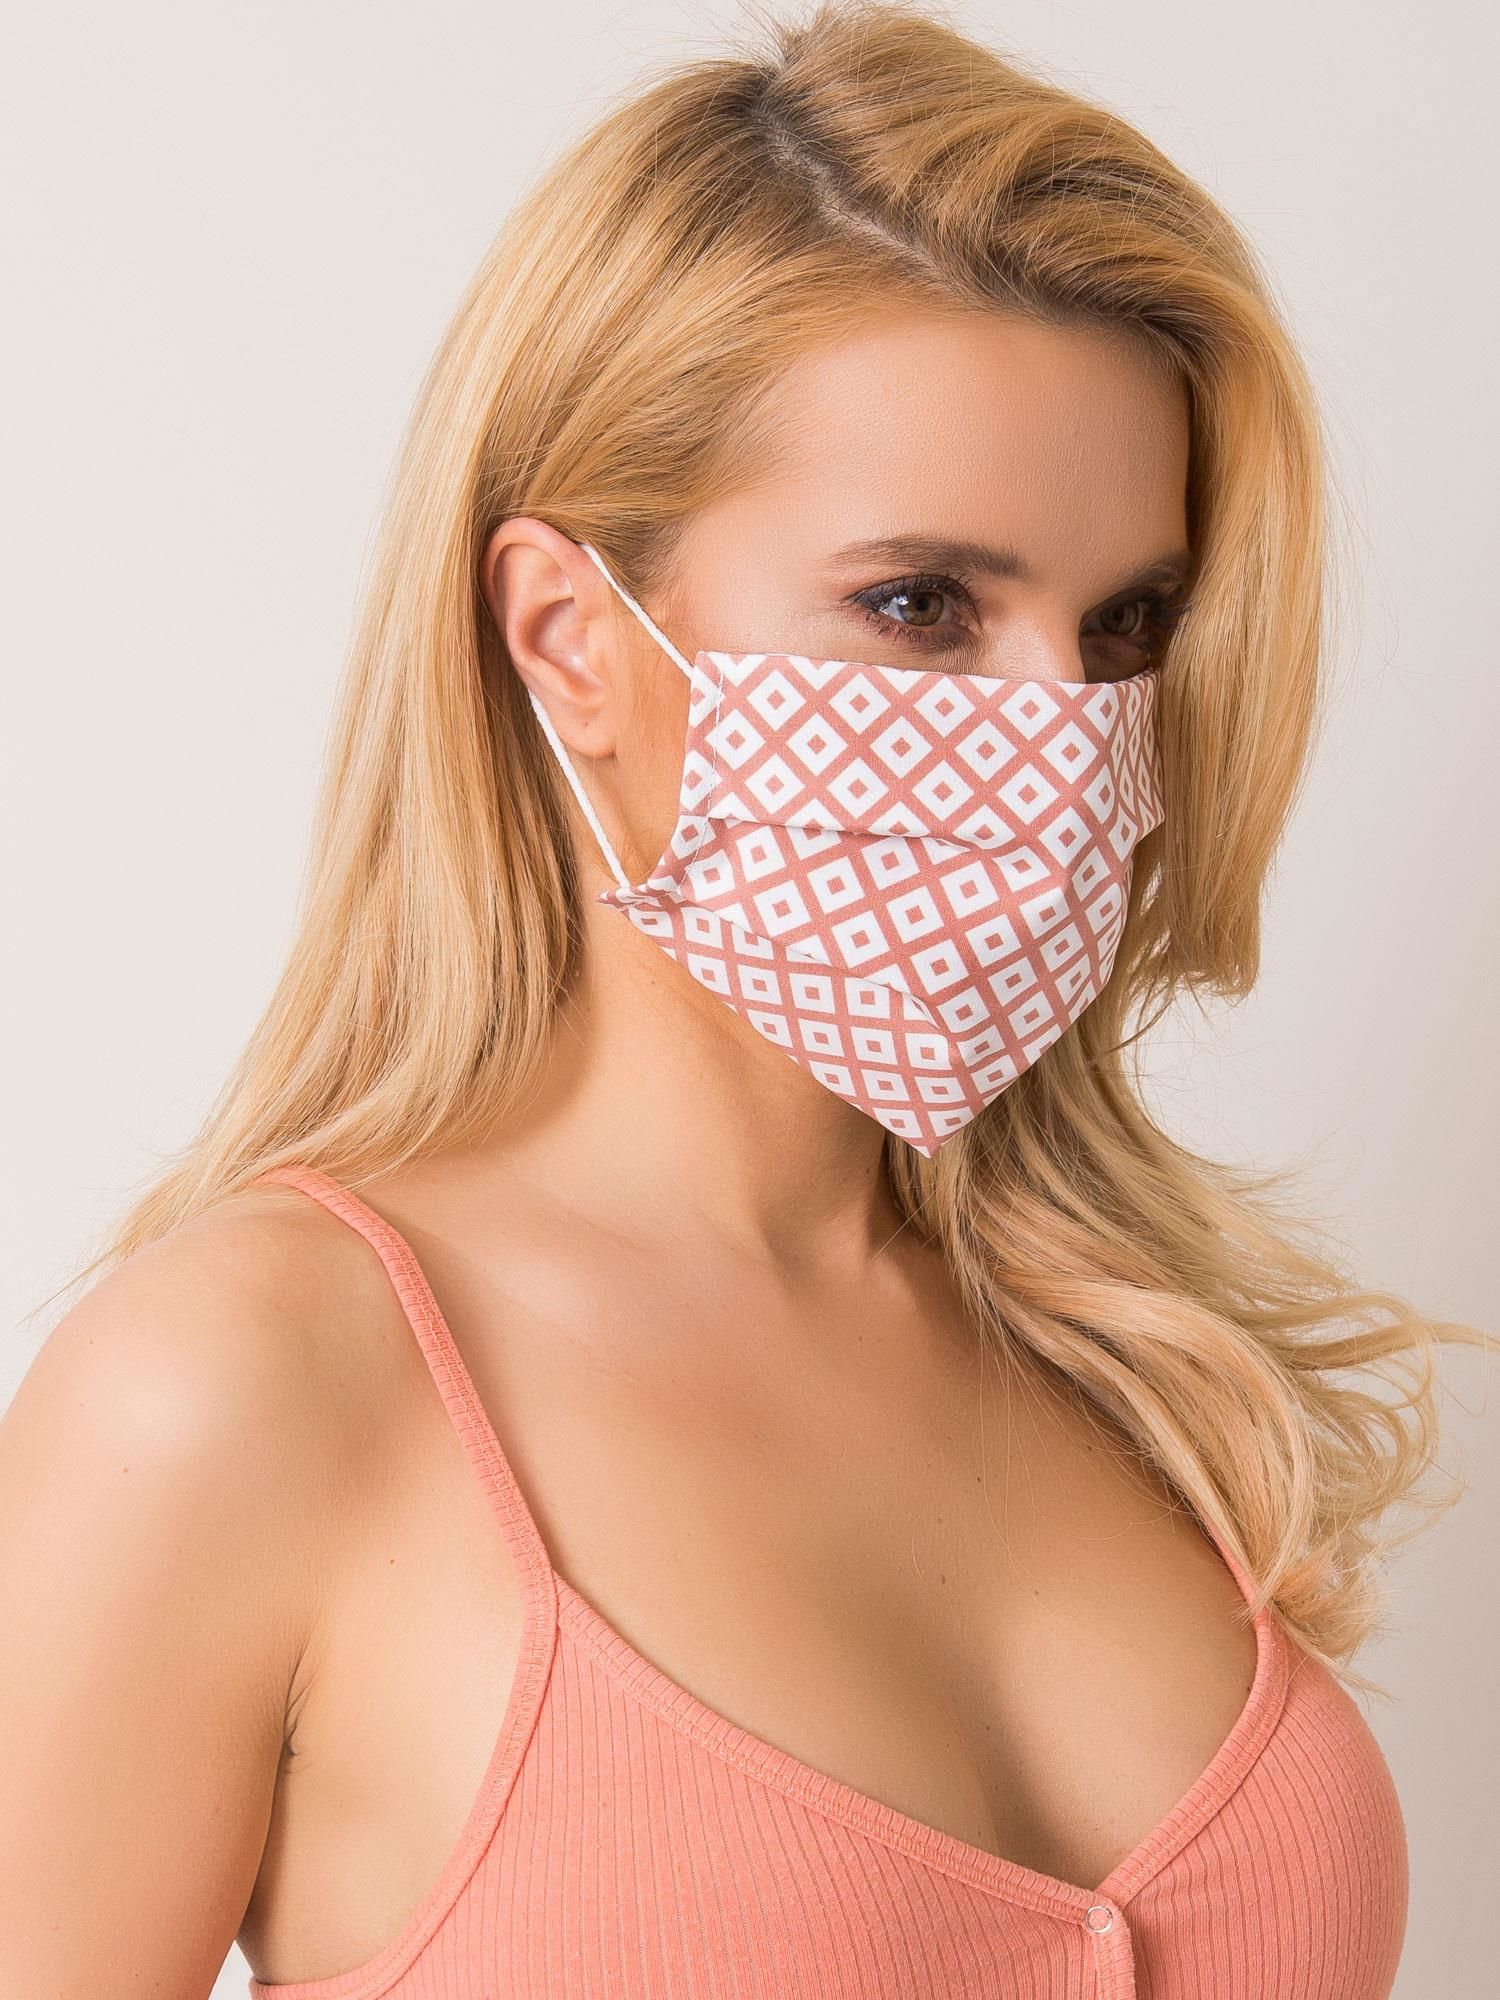 Dusty Pink Protective Mask With Geometric Patterns